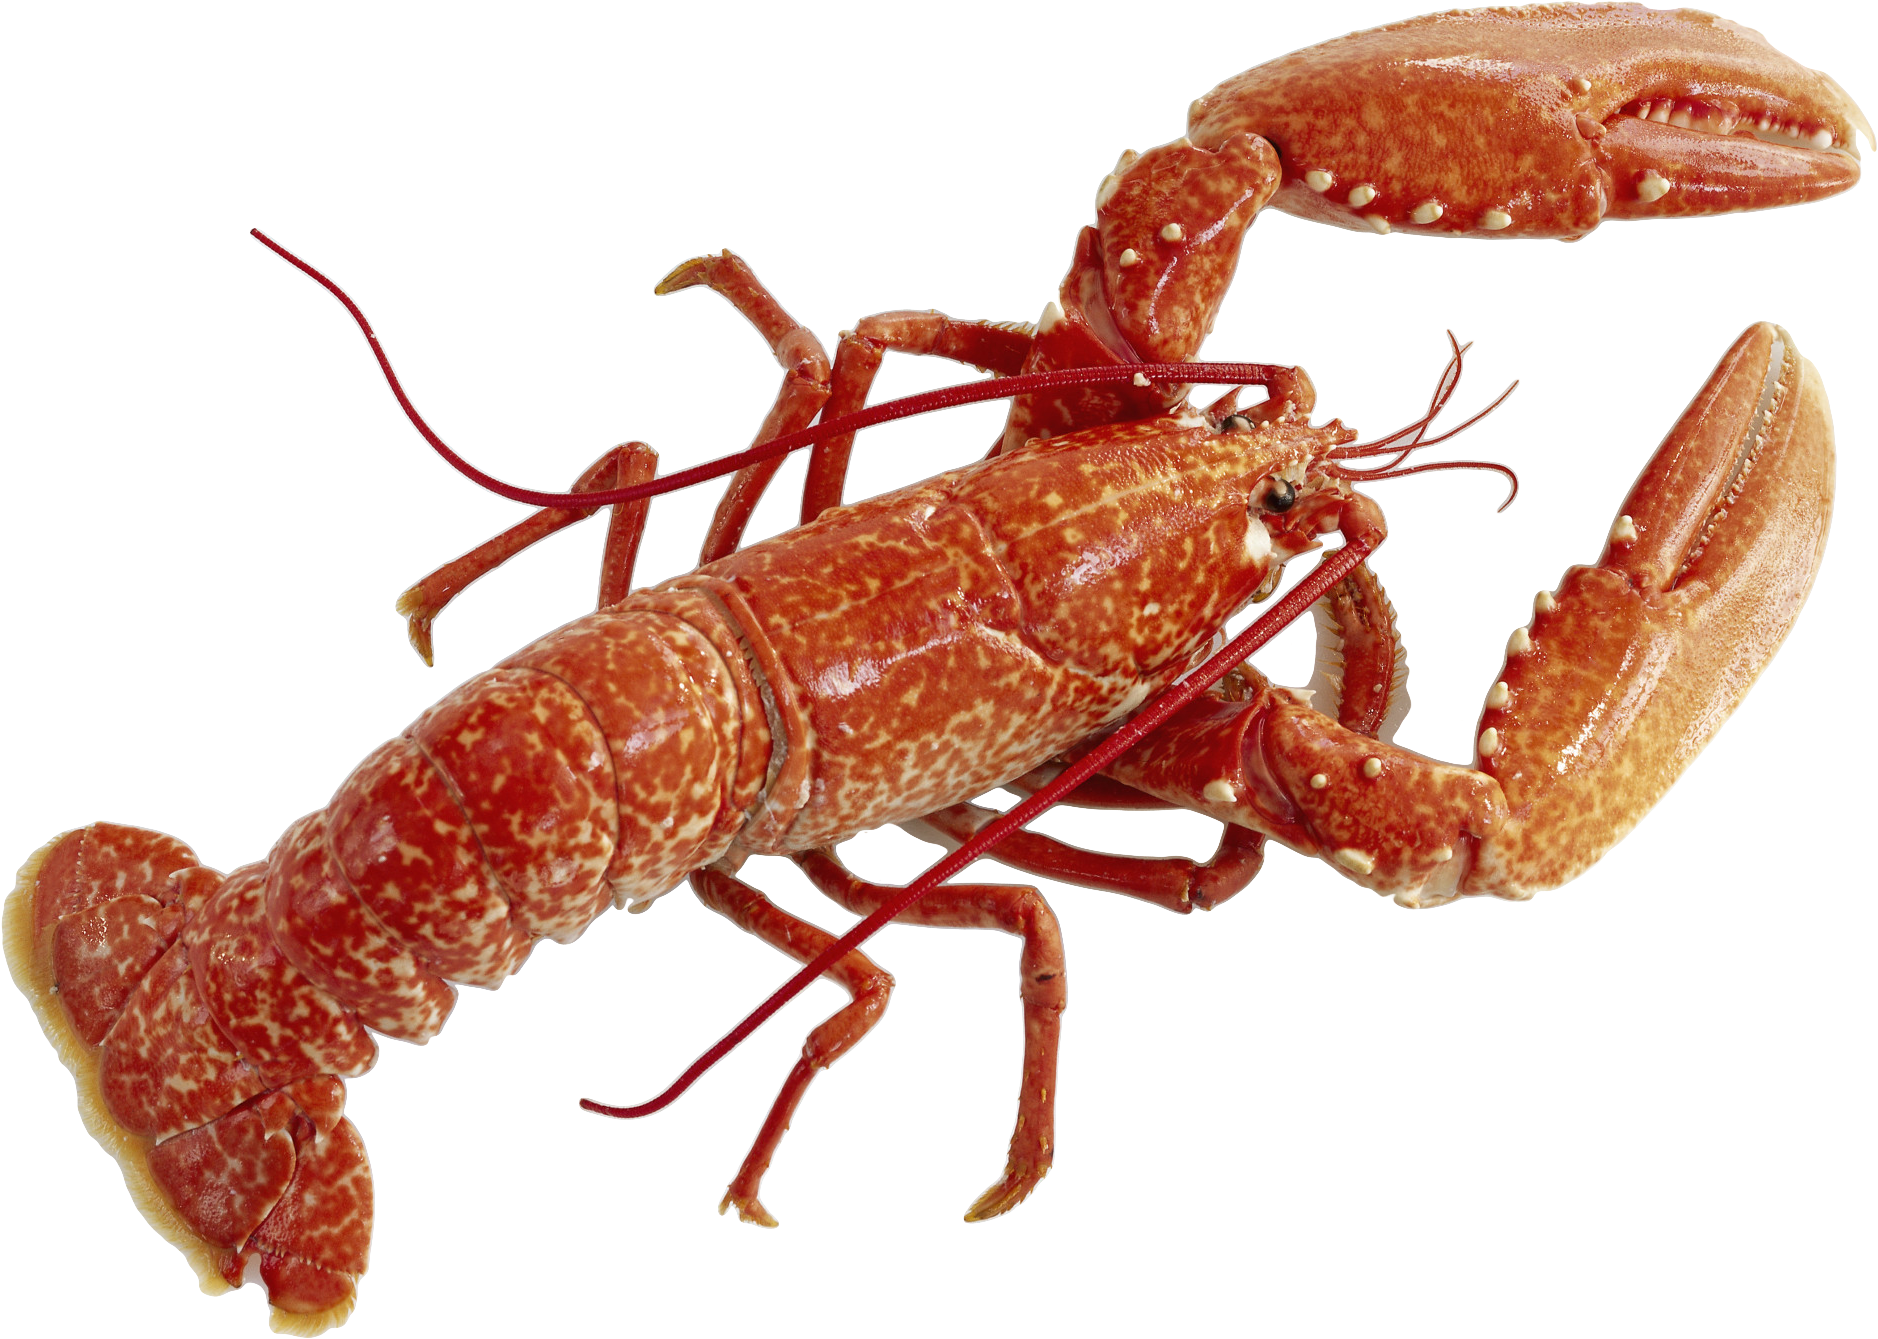 Image - Lobster Png (2229x1419)